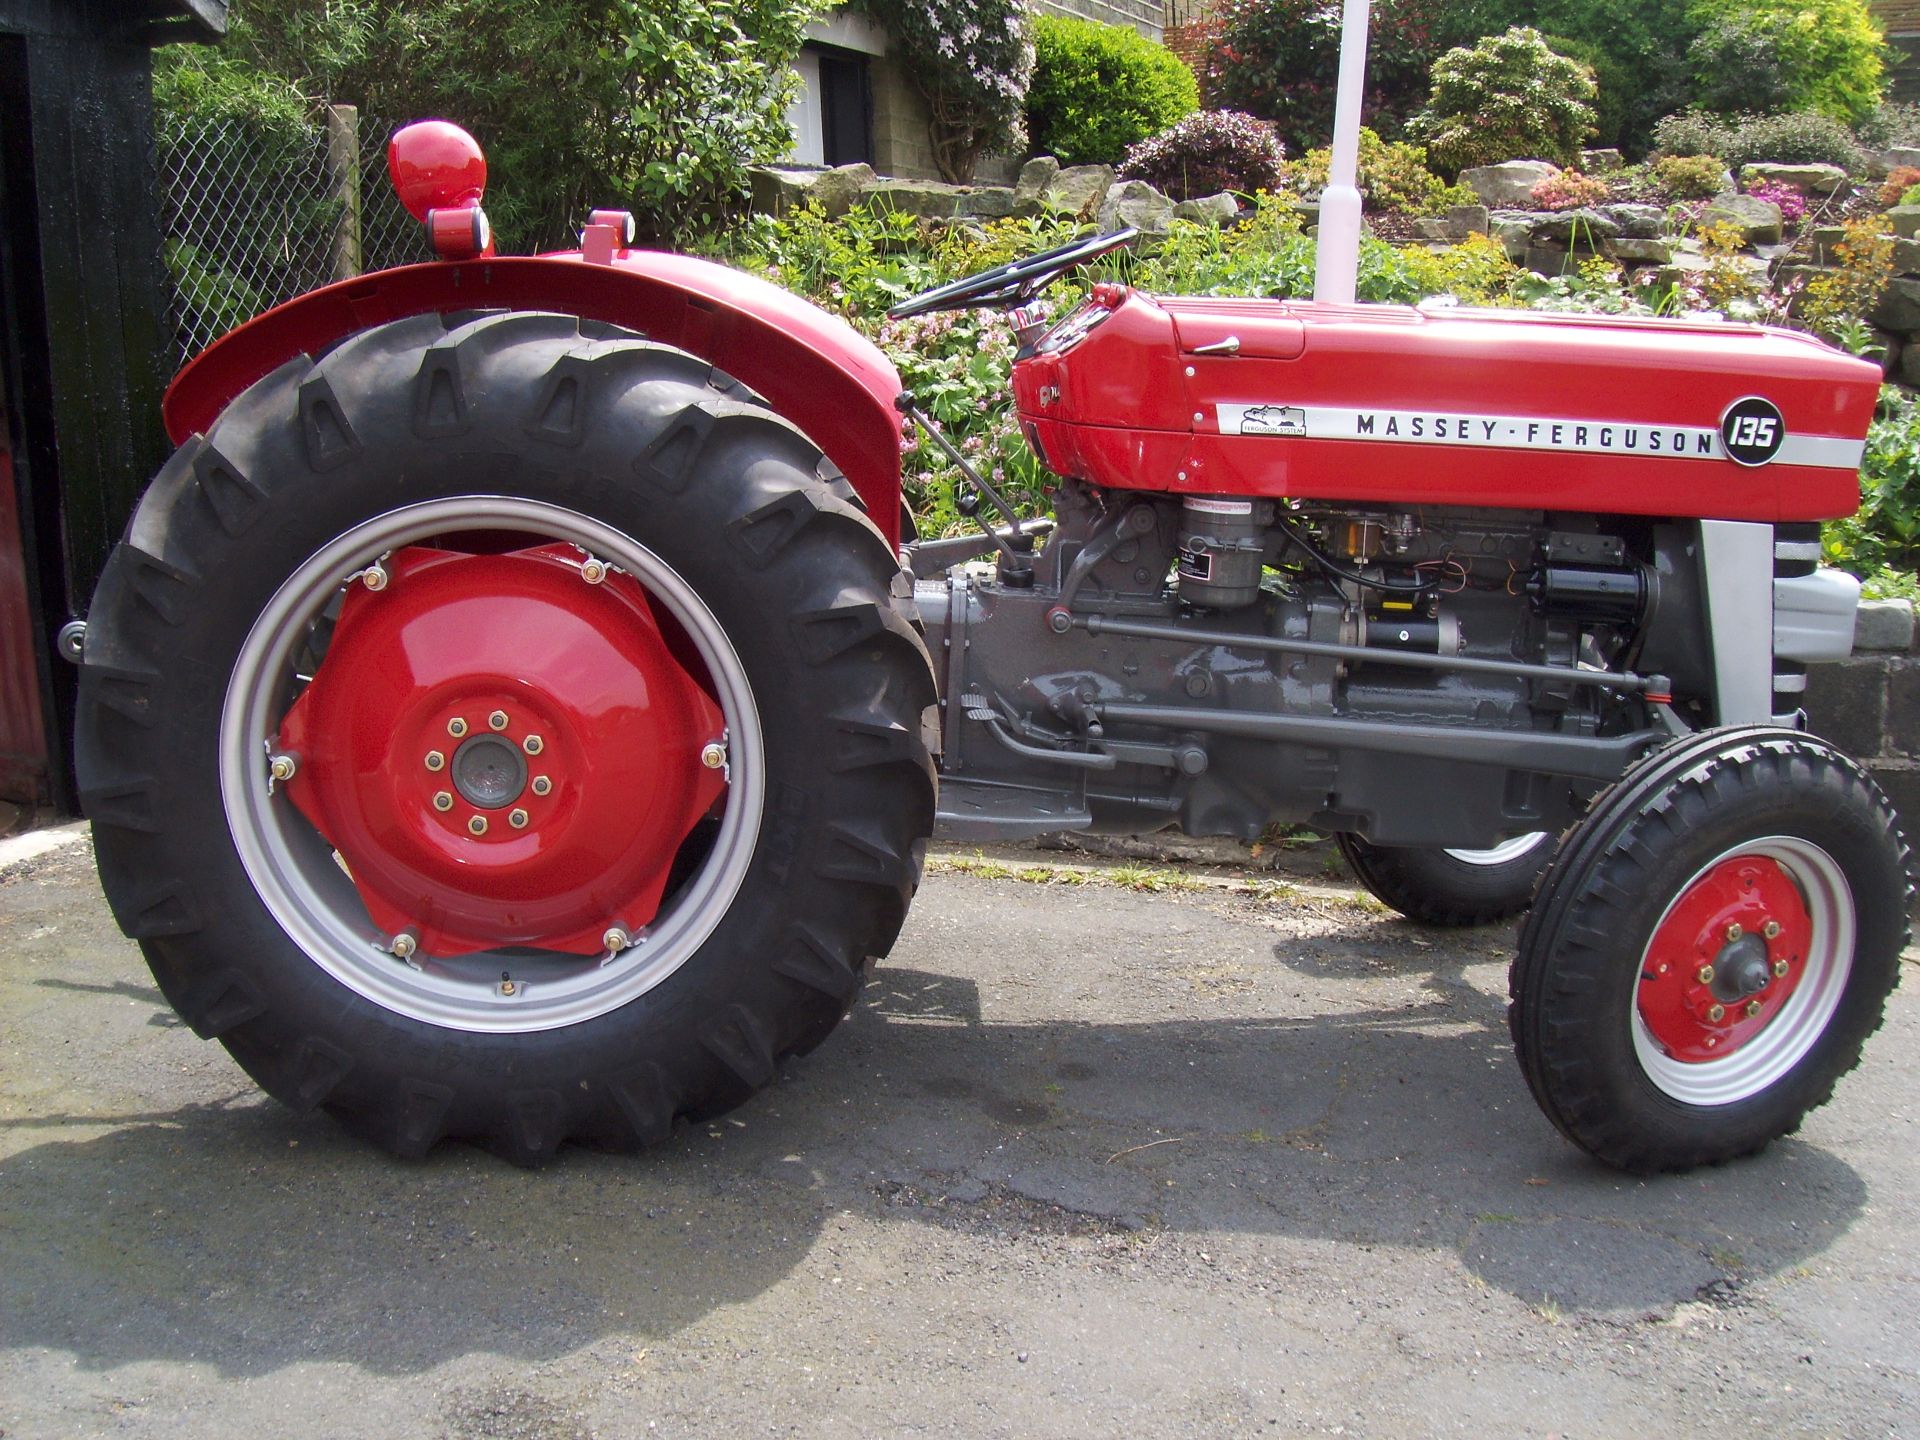 1965 MASSEY FERGUSON 135 3cylinder diesel TRACTOR Reg No: FNU 909C Serial No: 10334 Fitted with full - Image 2 of 3